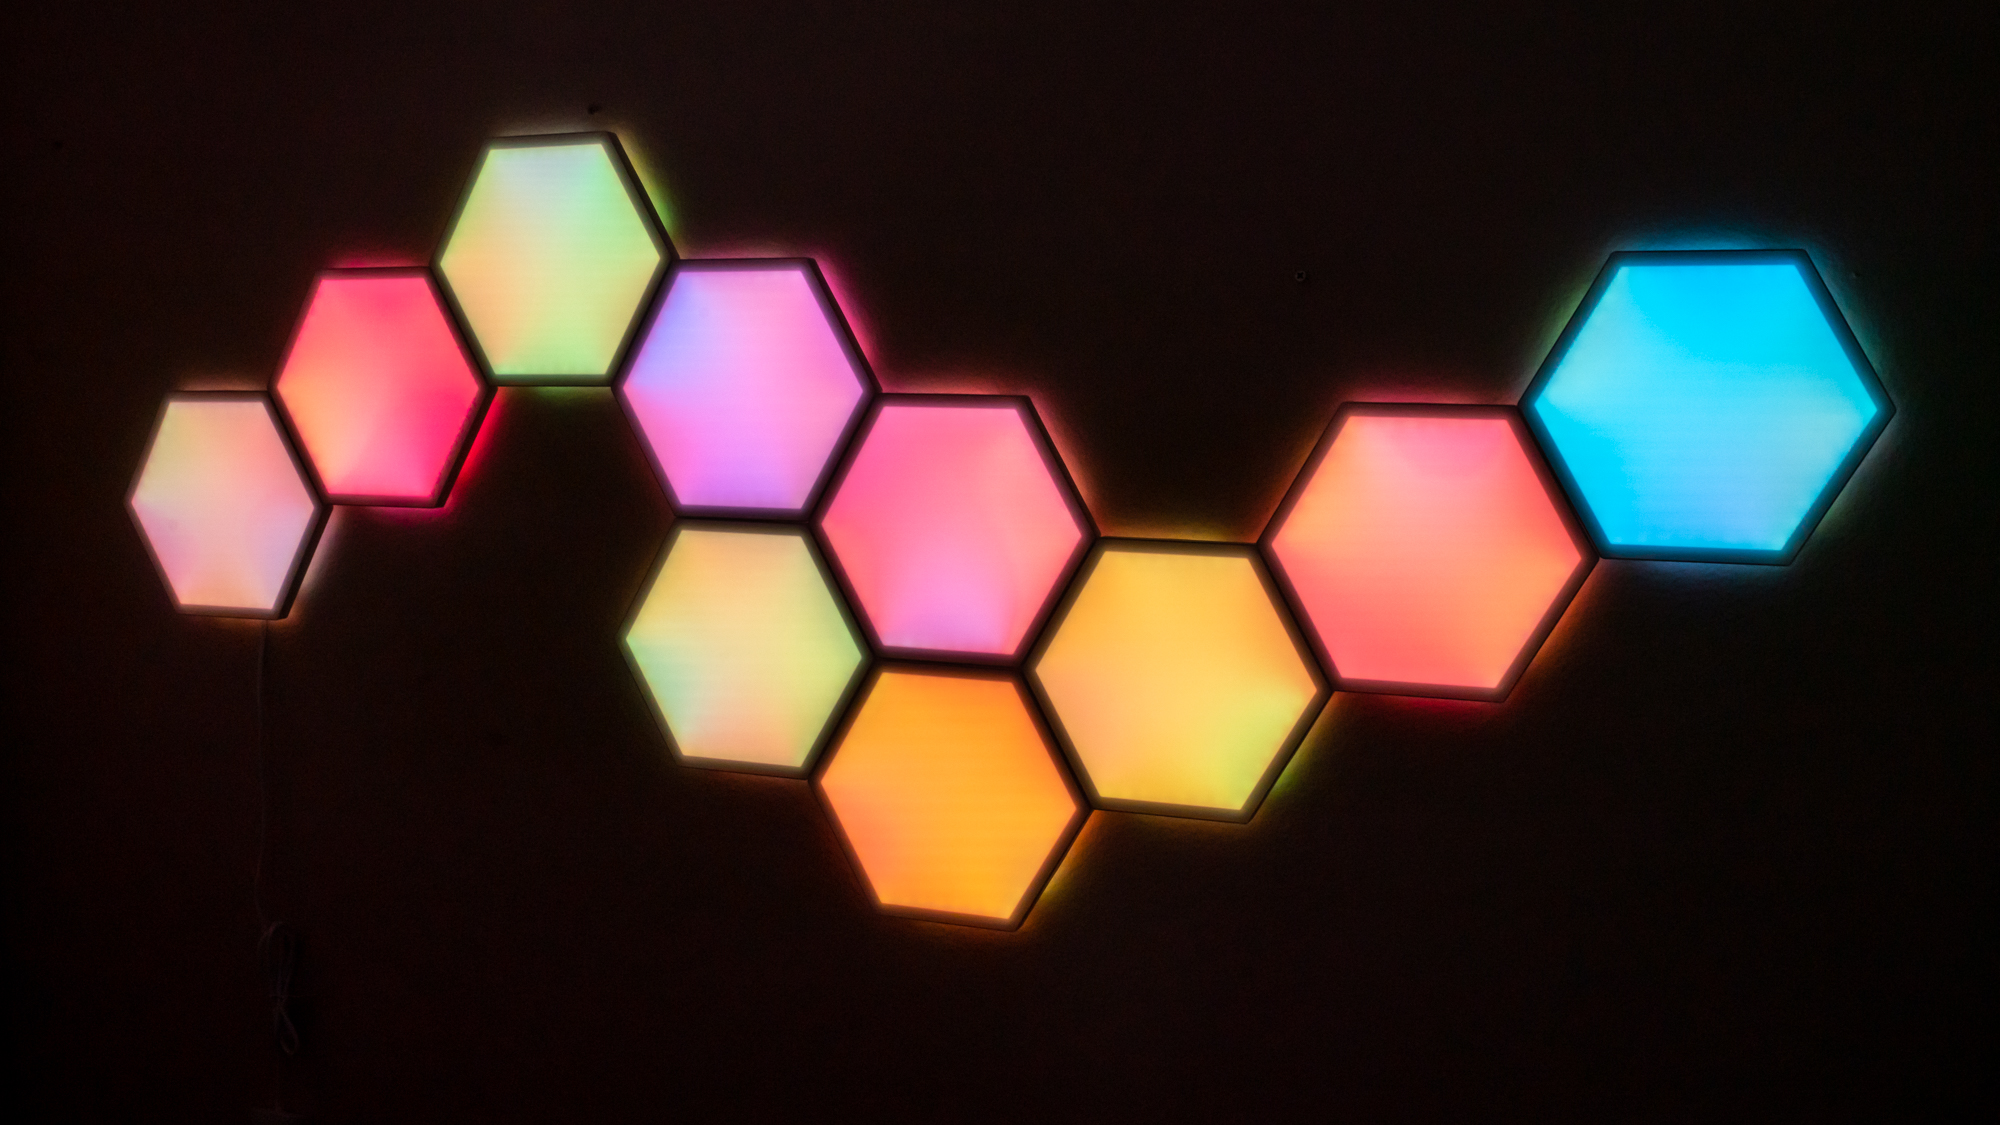 Govee Glide Hexa Light Panels review: smartly light up your space